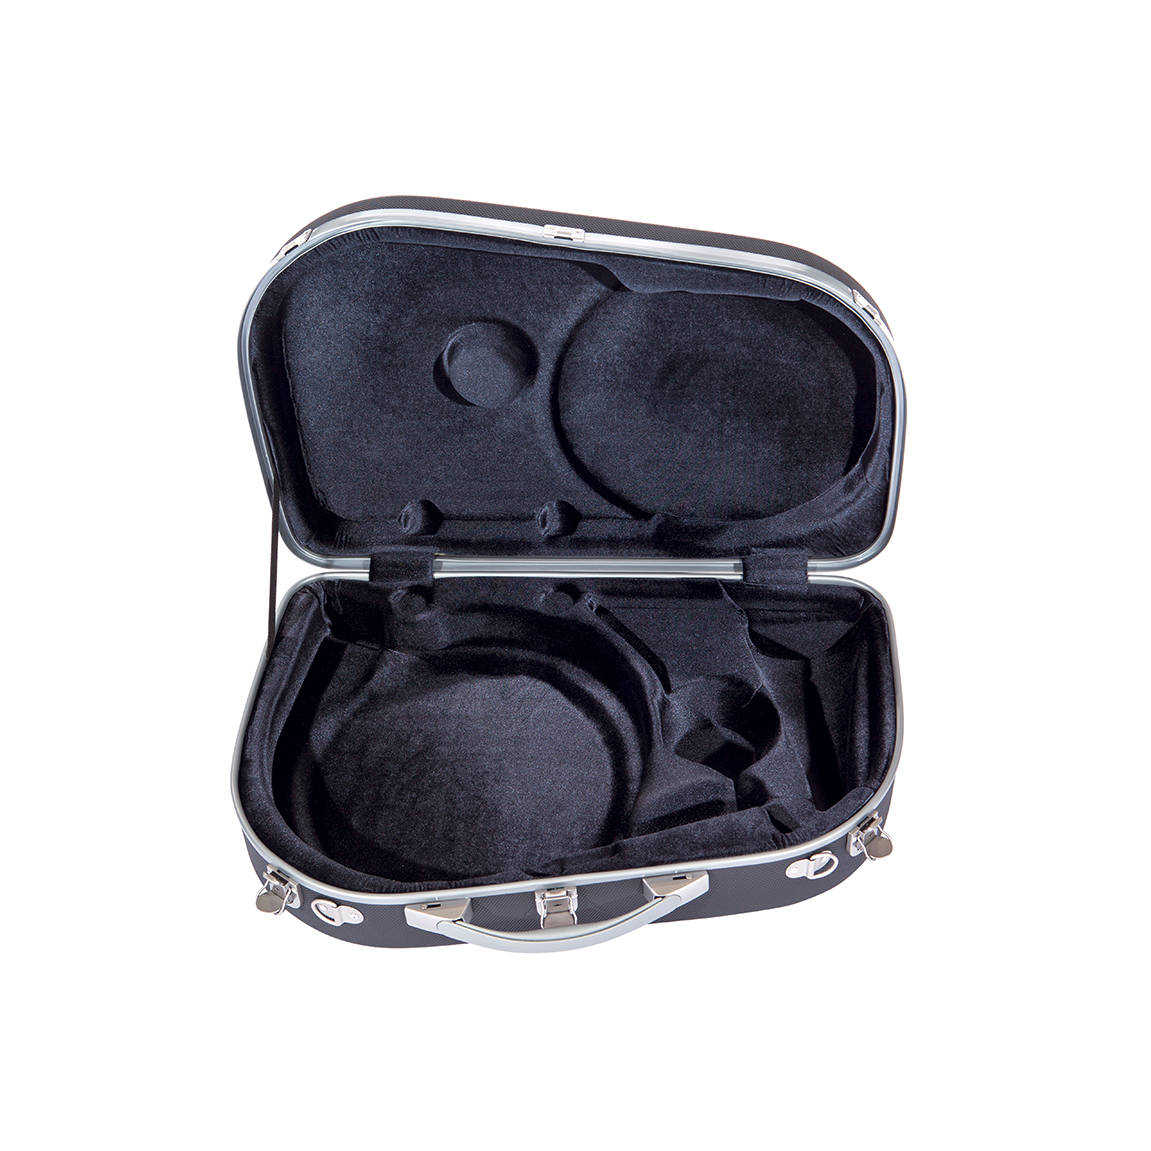 Bam - Panther Hightech French Horn Cases-Case-Bam-Music Elements